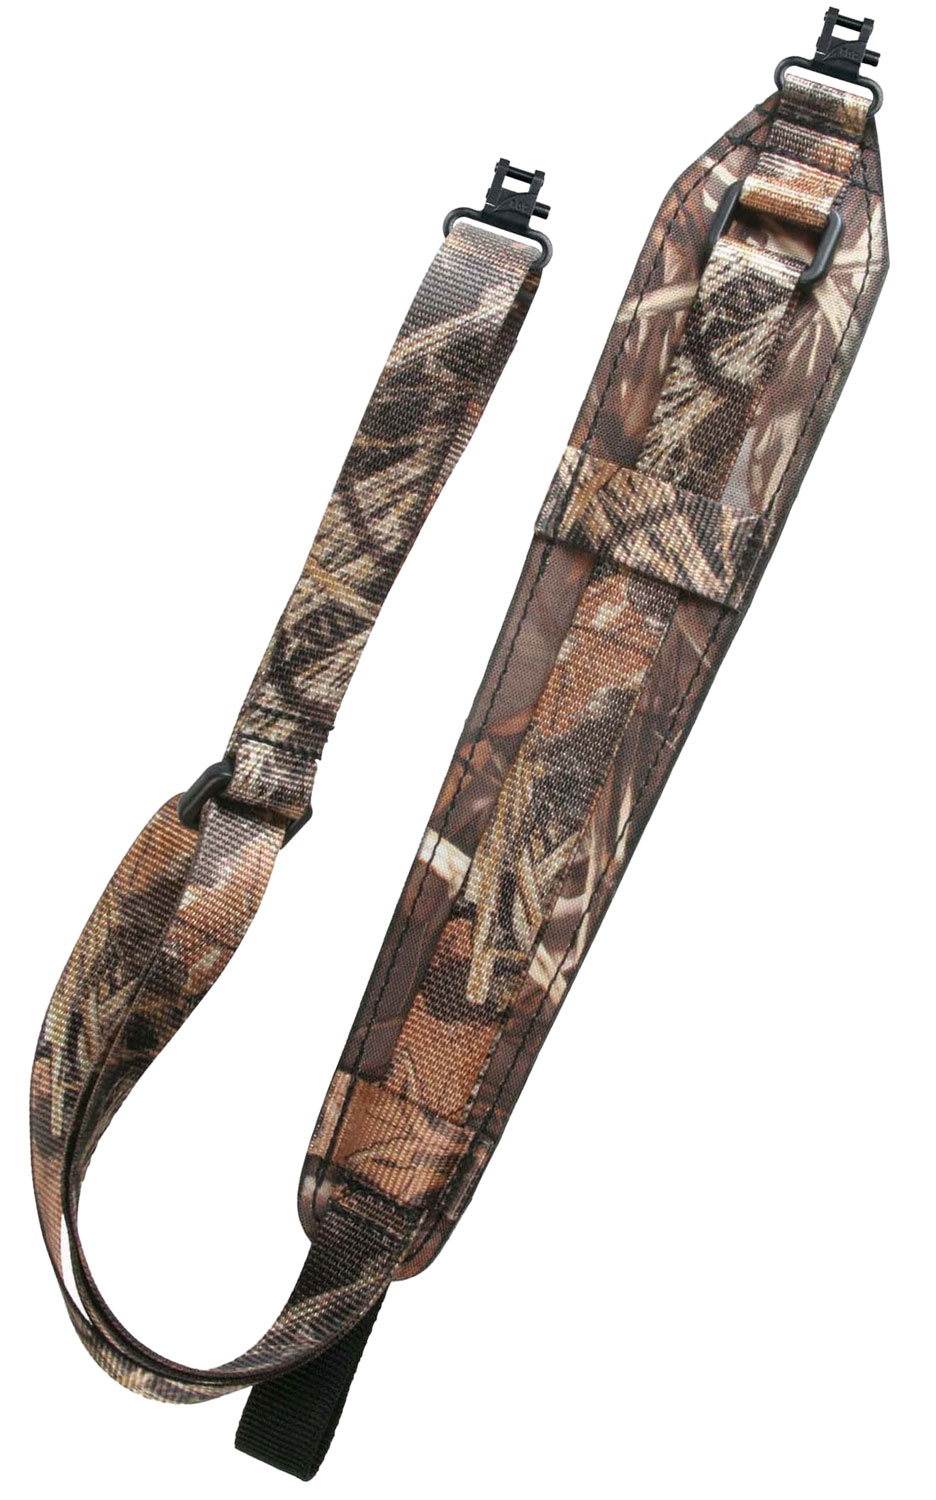 Padded Hunting Sling Swivels Fully Adjustable Camo w/ Antler Graphic 